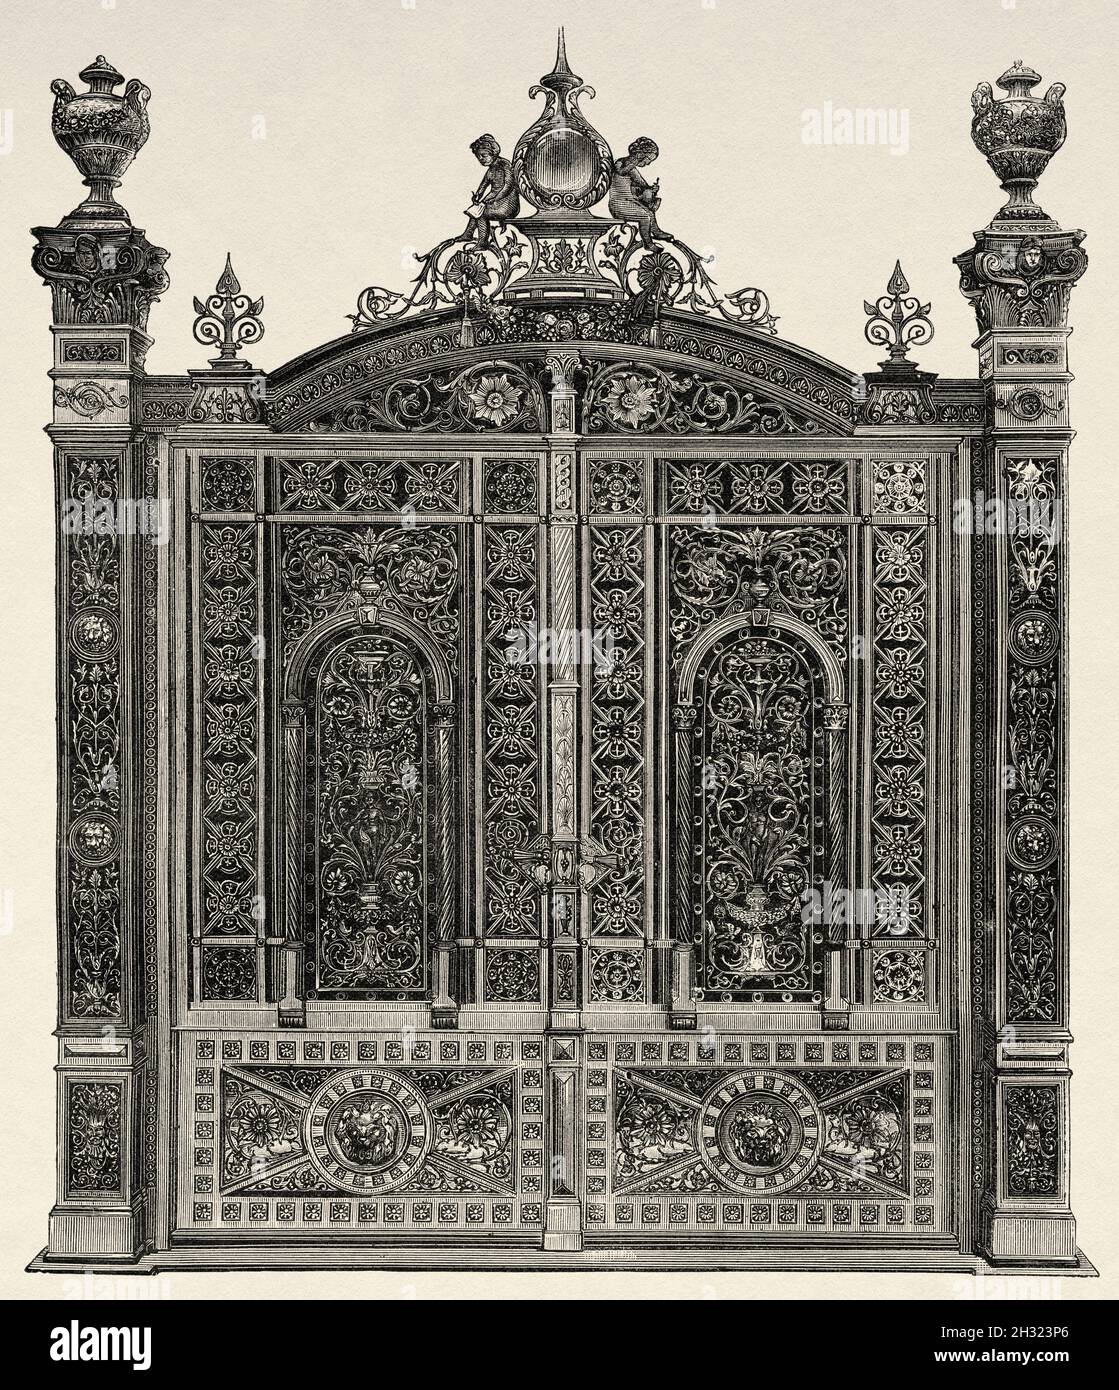 Iron gate to the house of the Austrian architect Otto Koloman Wagner (1841-1918) Old 19th century engraved illustration from La Ilustración Artística 1882 Stock Photo